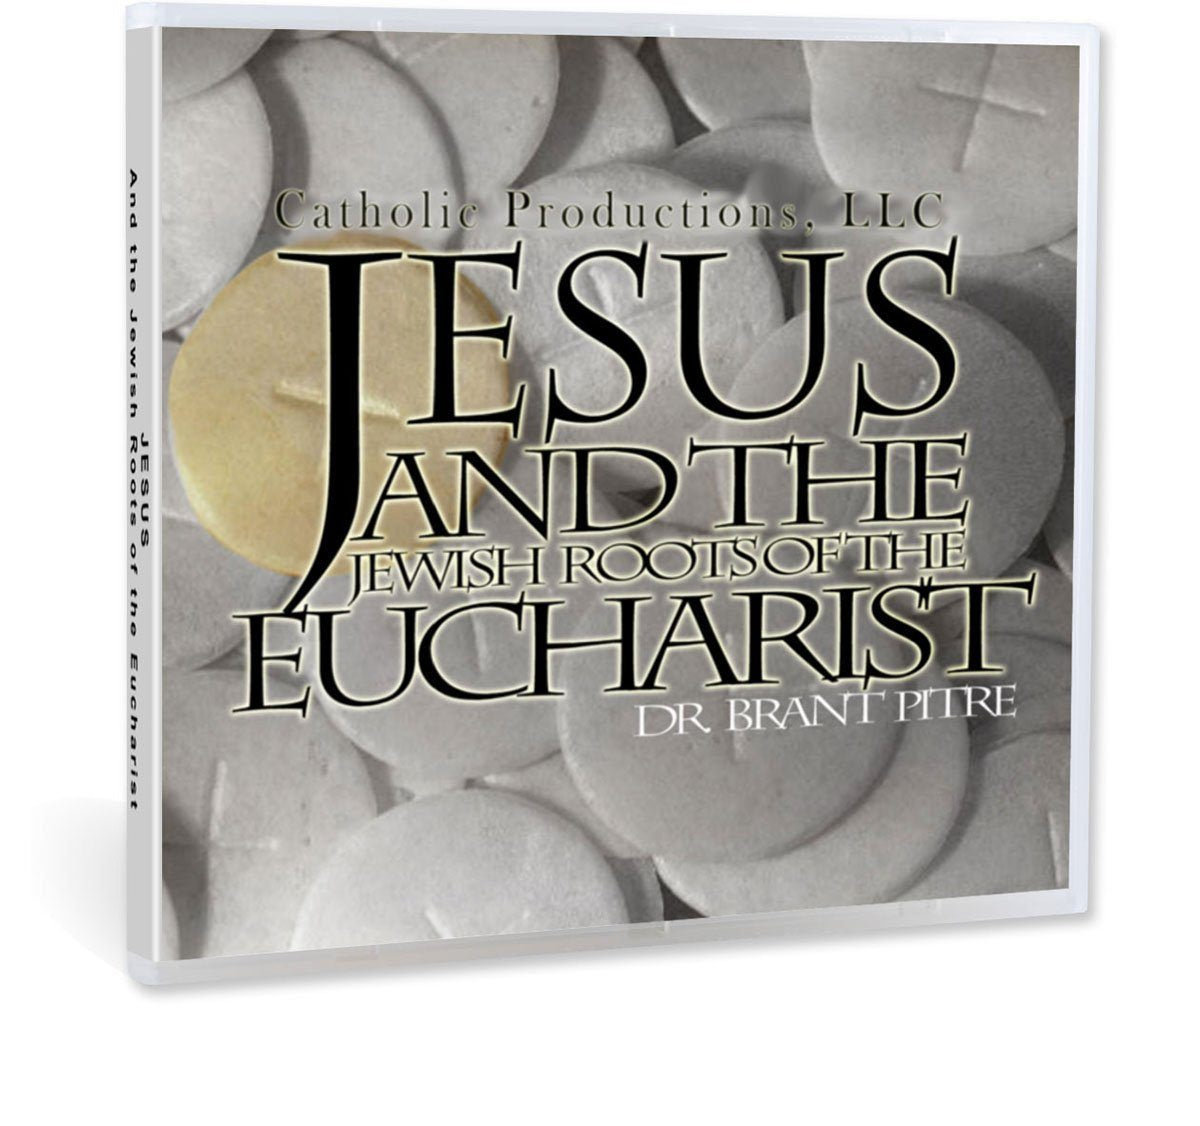 In this Catholic Bible study, Dr. Brant Pitre covers the Eucharist as the New Passover, New Manna for the New Exodus, and New Bread of the Presence on CD.